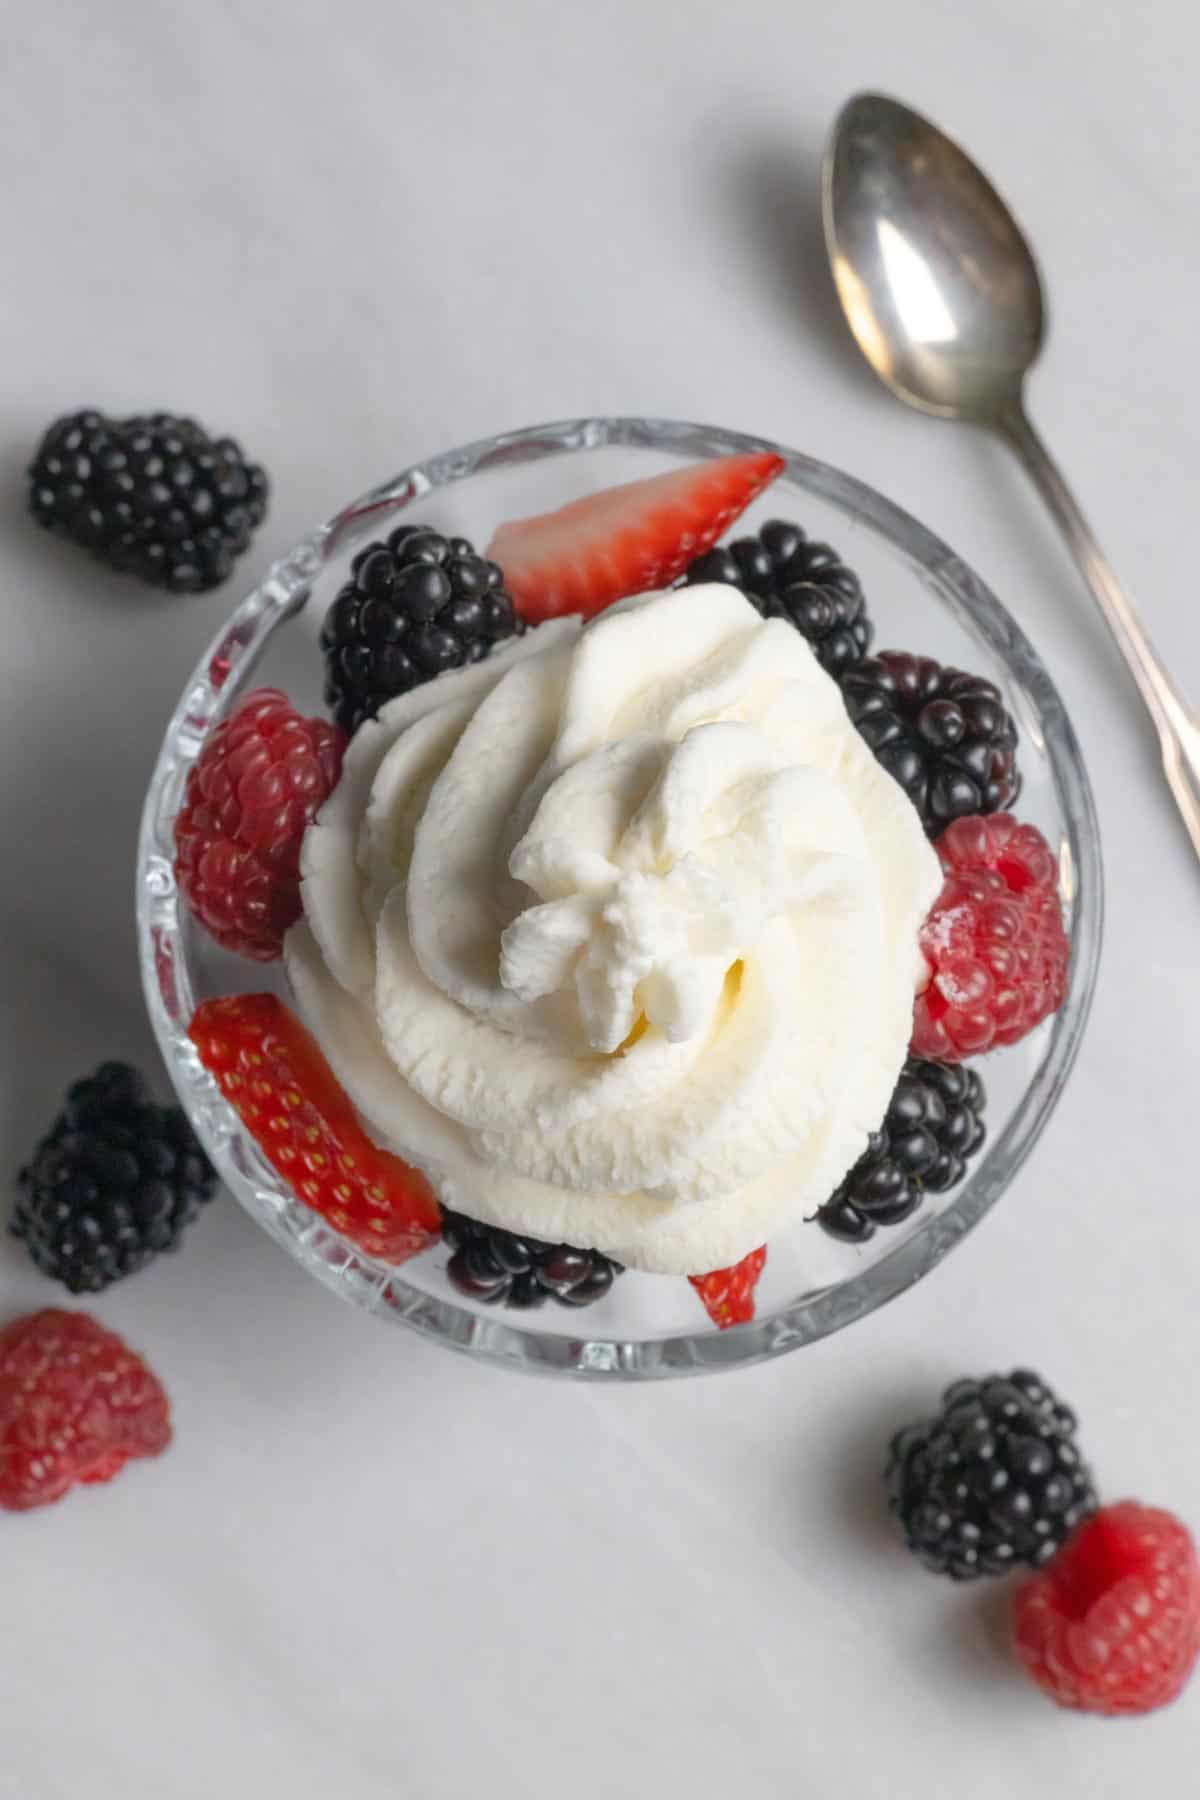 Dessert dish with raspberries, sliced strawberries and blackberries topped with piped sugar-free whipped cream.